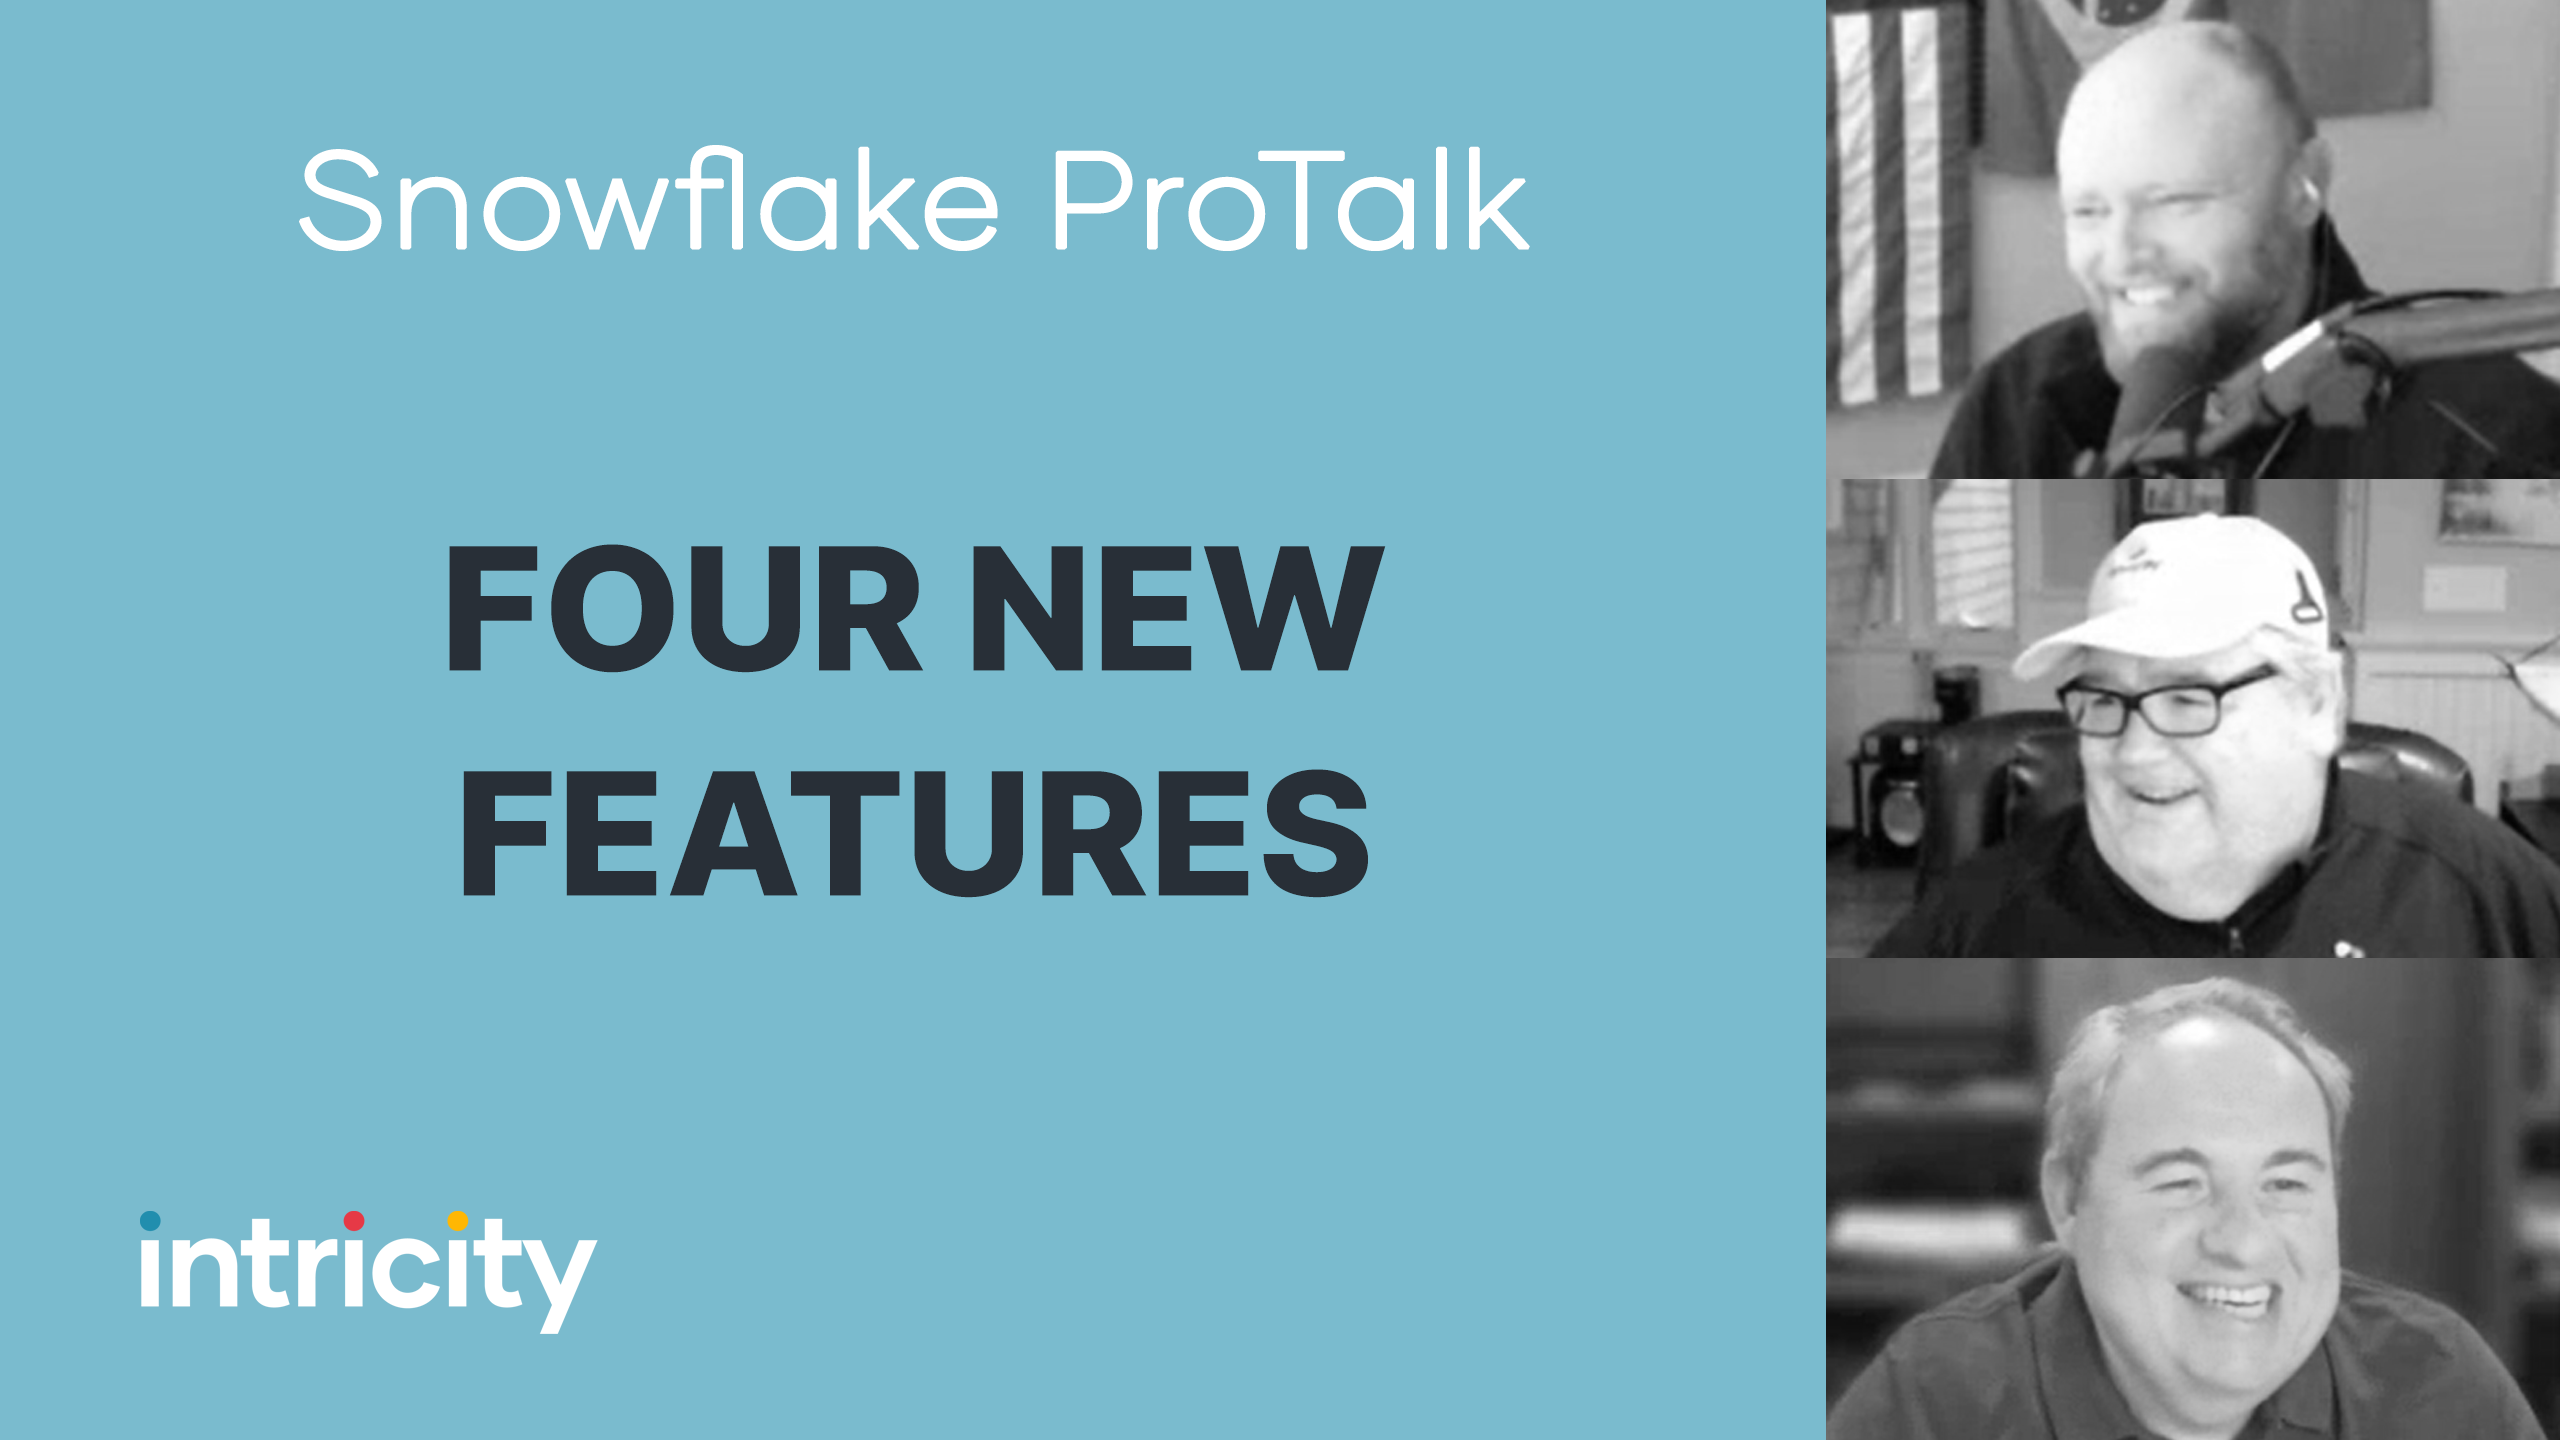 Snowflake ProTalk: Four new features in Snowflake